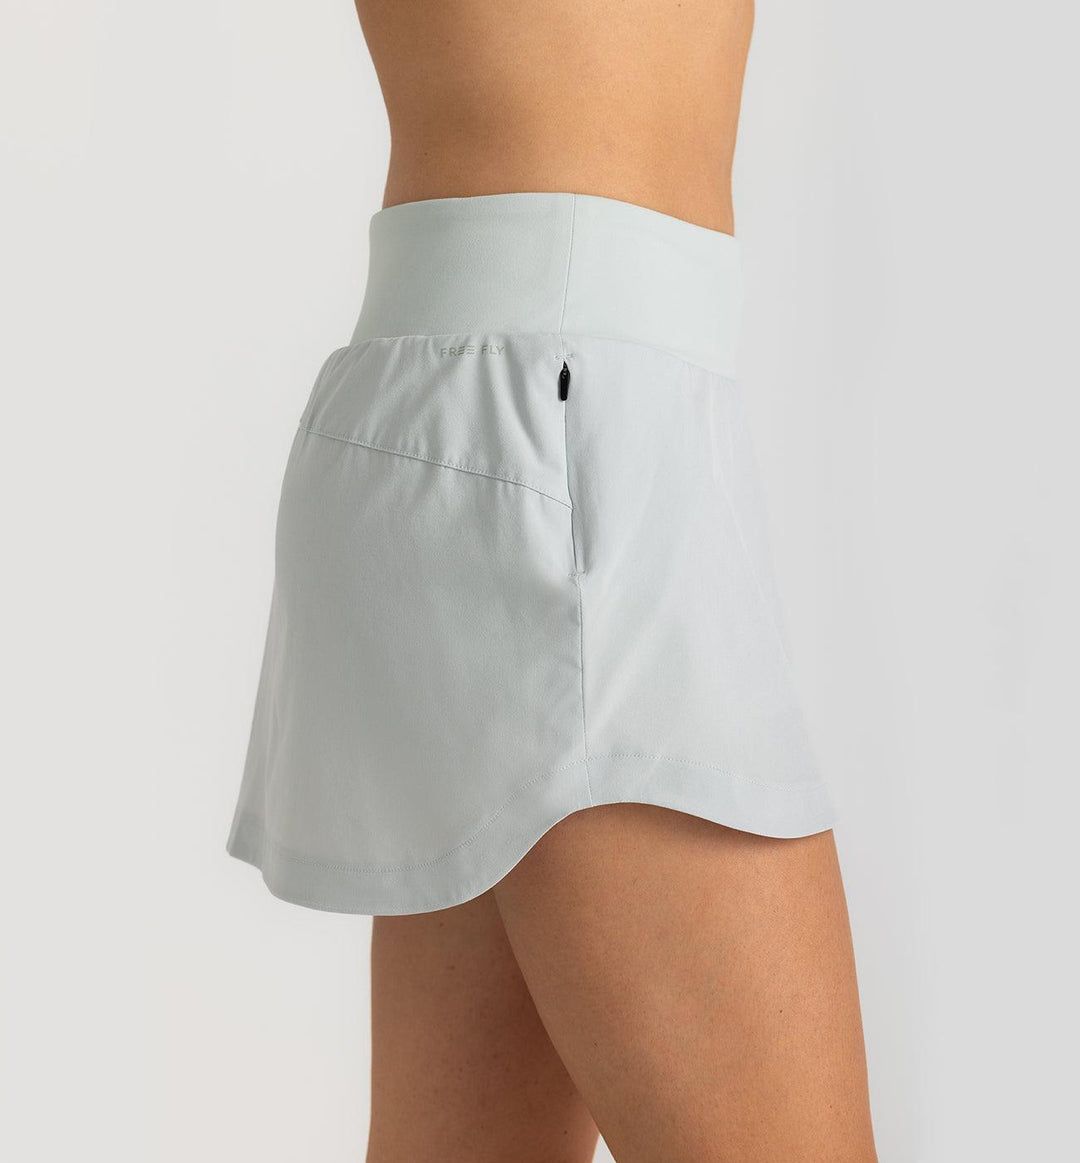 Women's Bamboo-Lined Active Breeze Skort 13" - Davidson Provision Co.